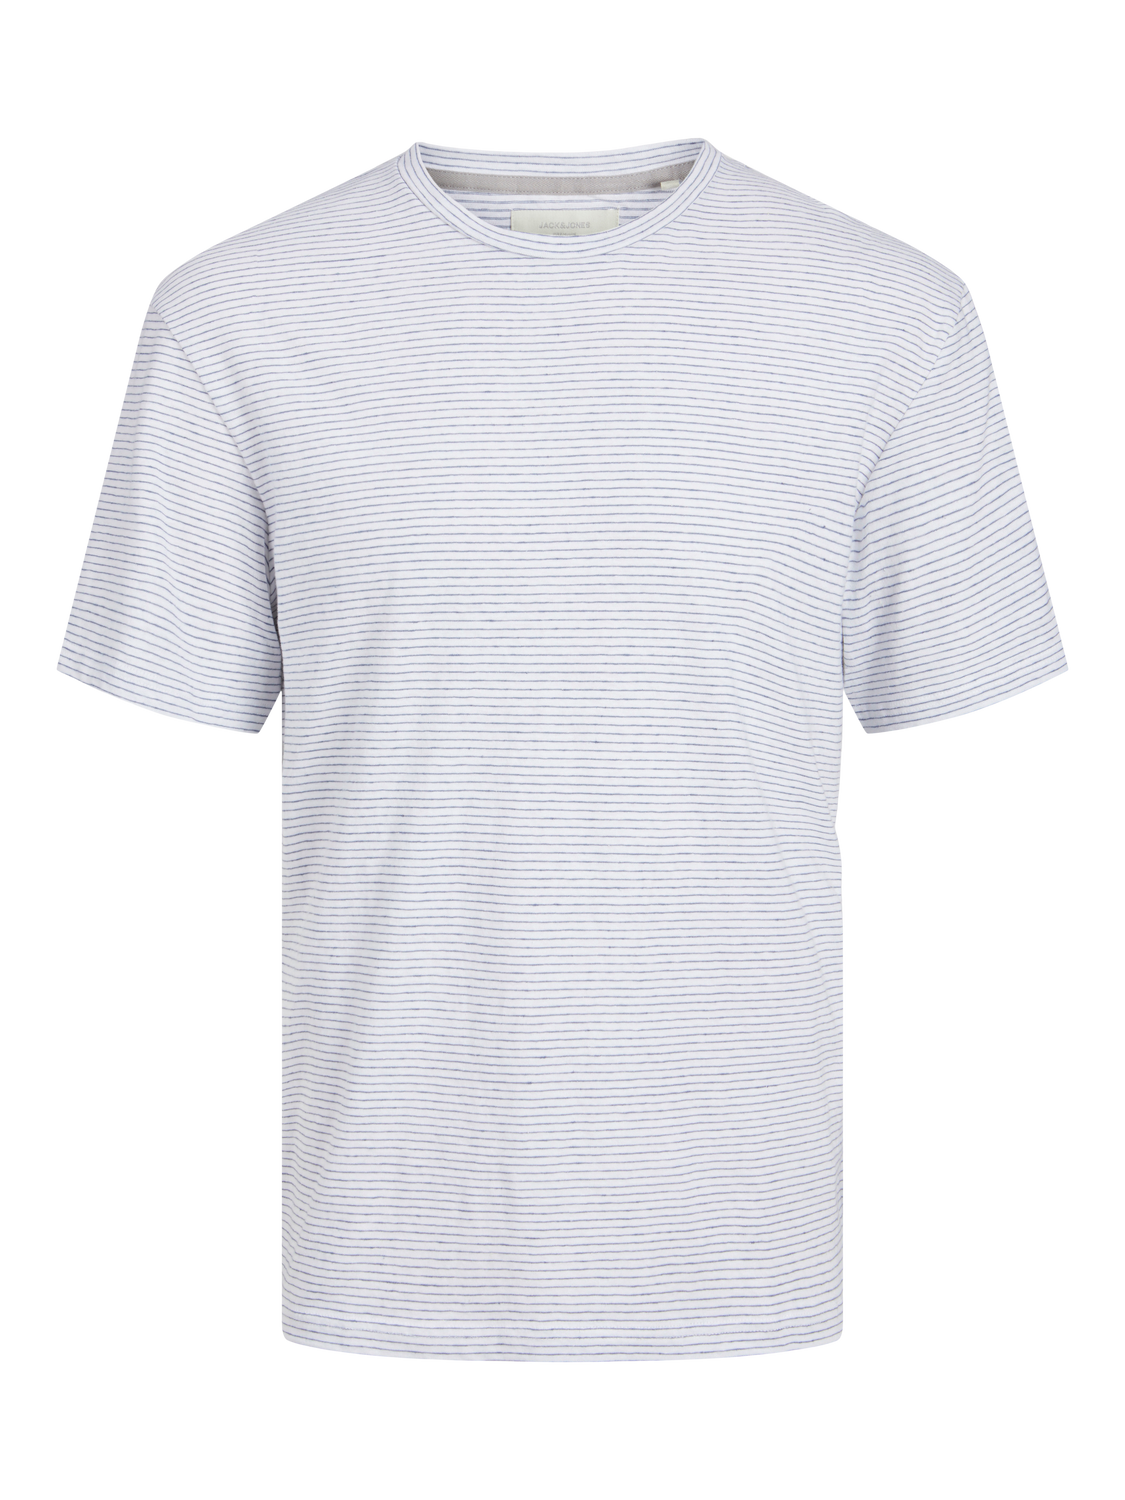 Jack & Jones Relaxed Fit Round Neck Linen T-Shirt -Bright White - 12252797